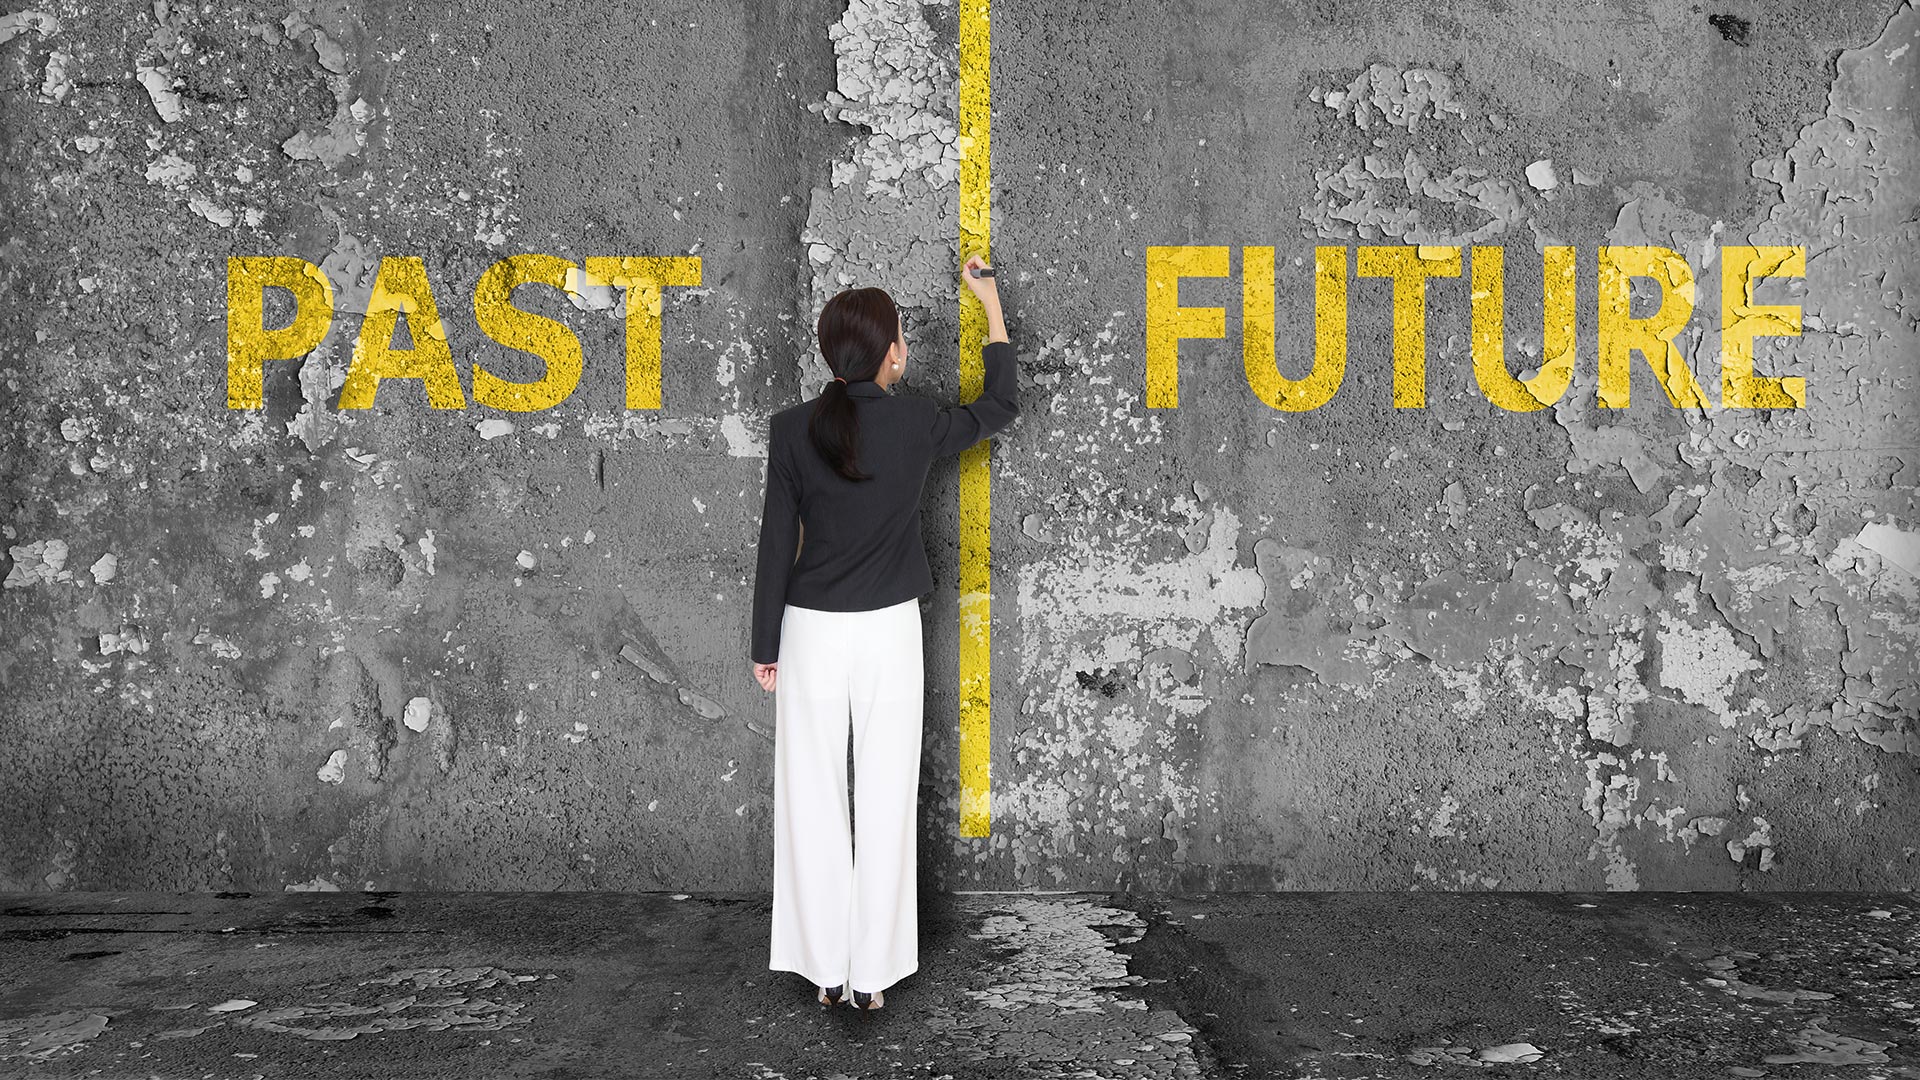 Brunette woman drawing a yellow line between the words 'PAST' and 'FUTURE' which are written on a grey wall.